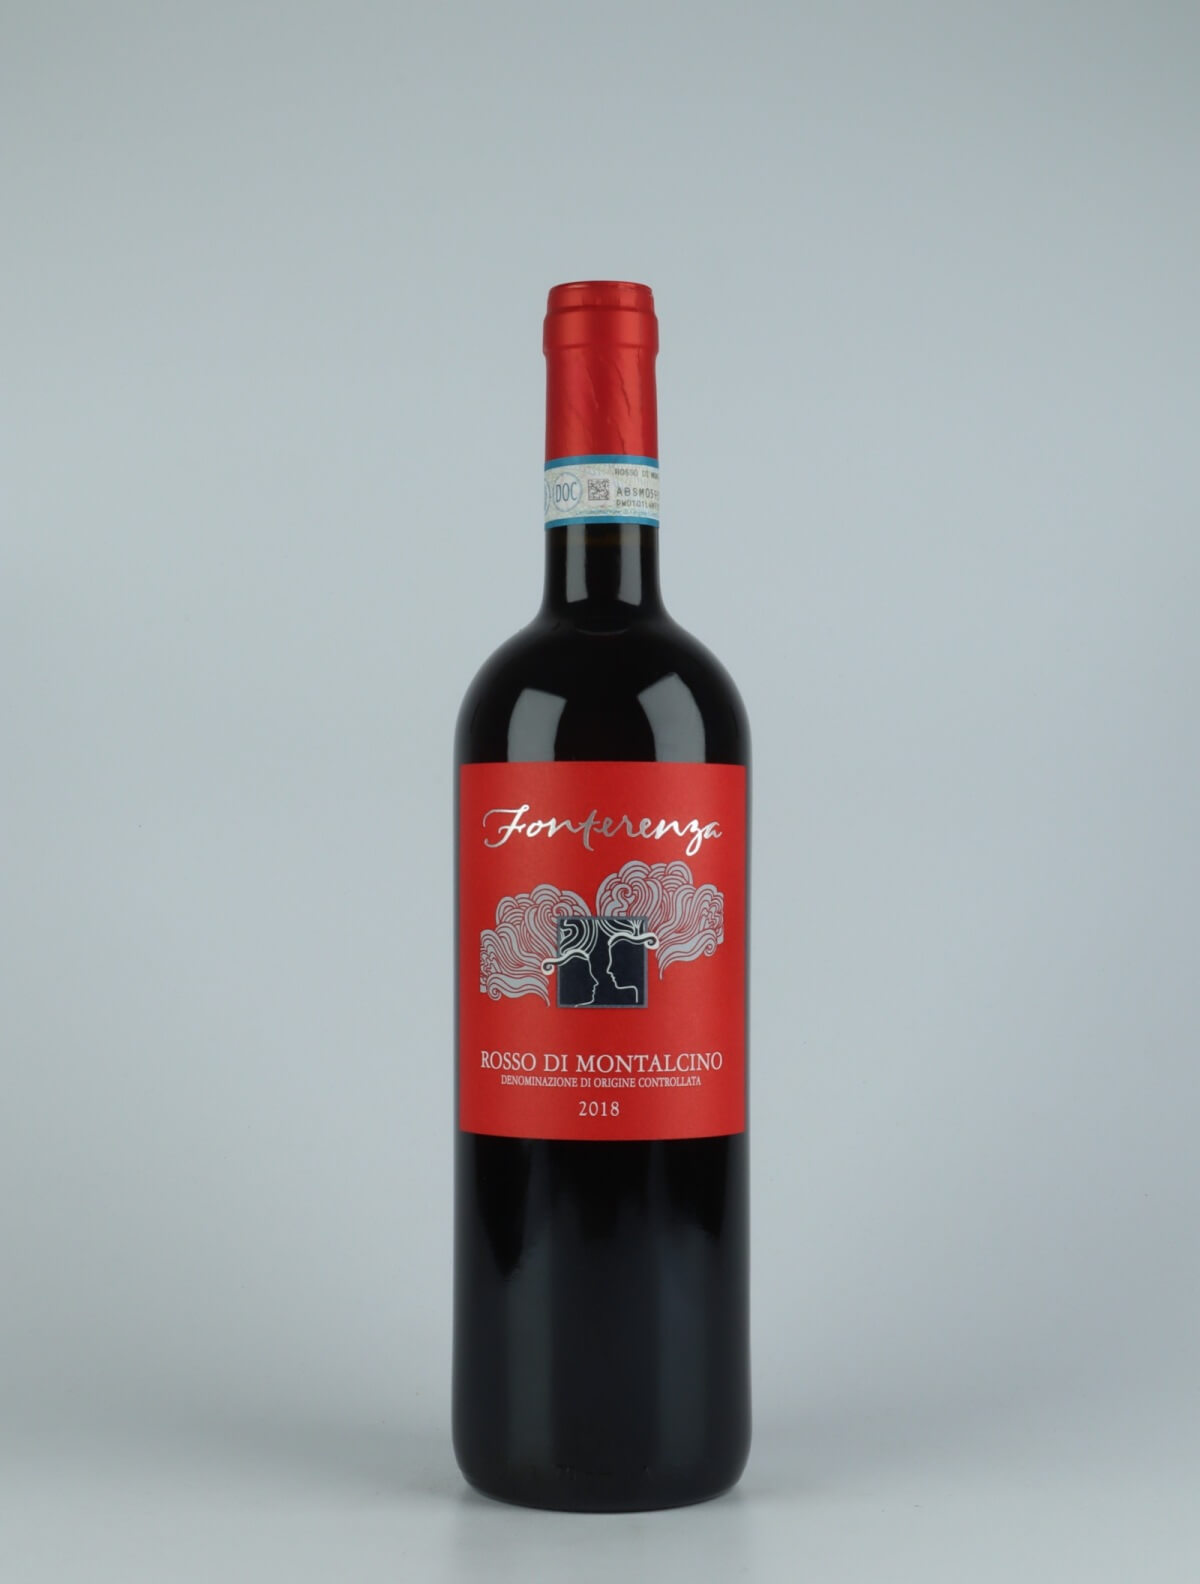 A bottle 2018 Rosso di Montalcino Red wine from , Tuscany in Italy